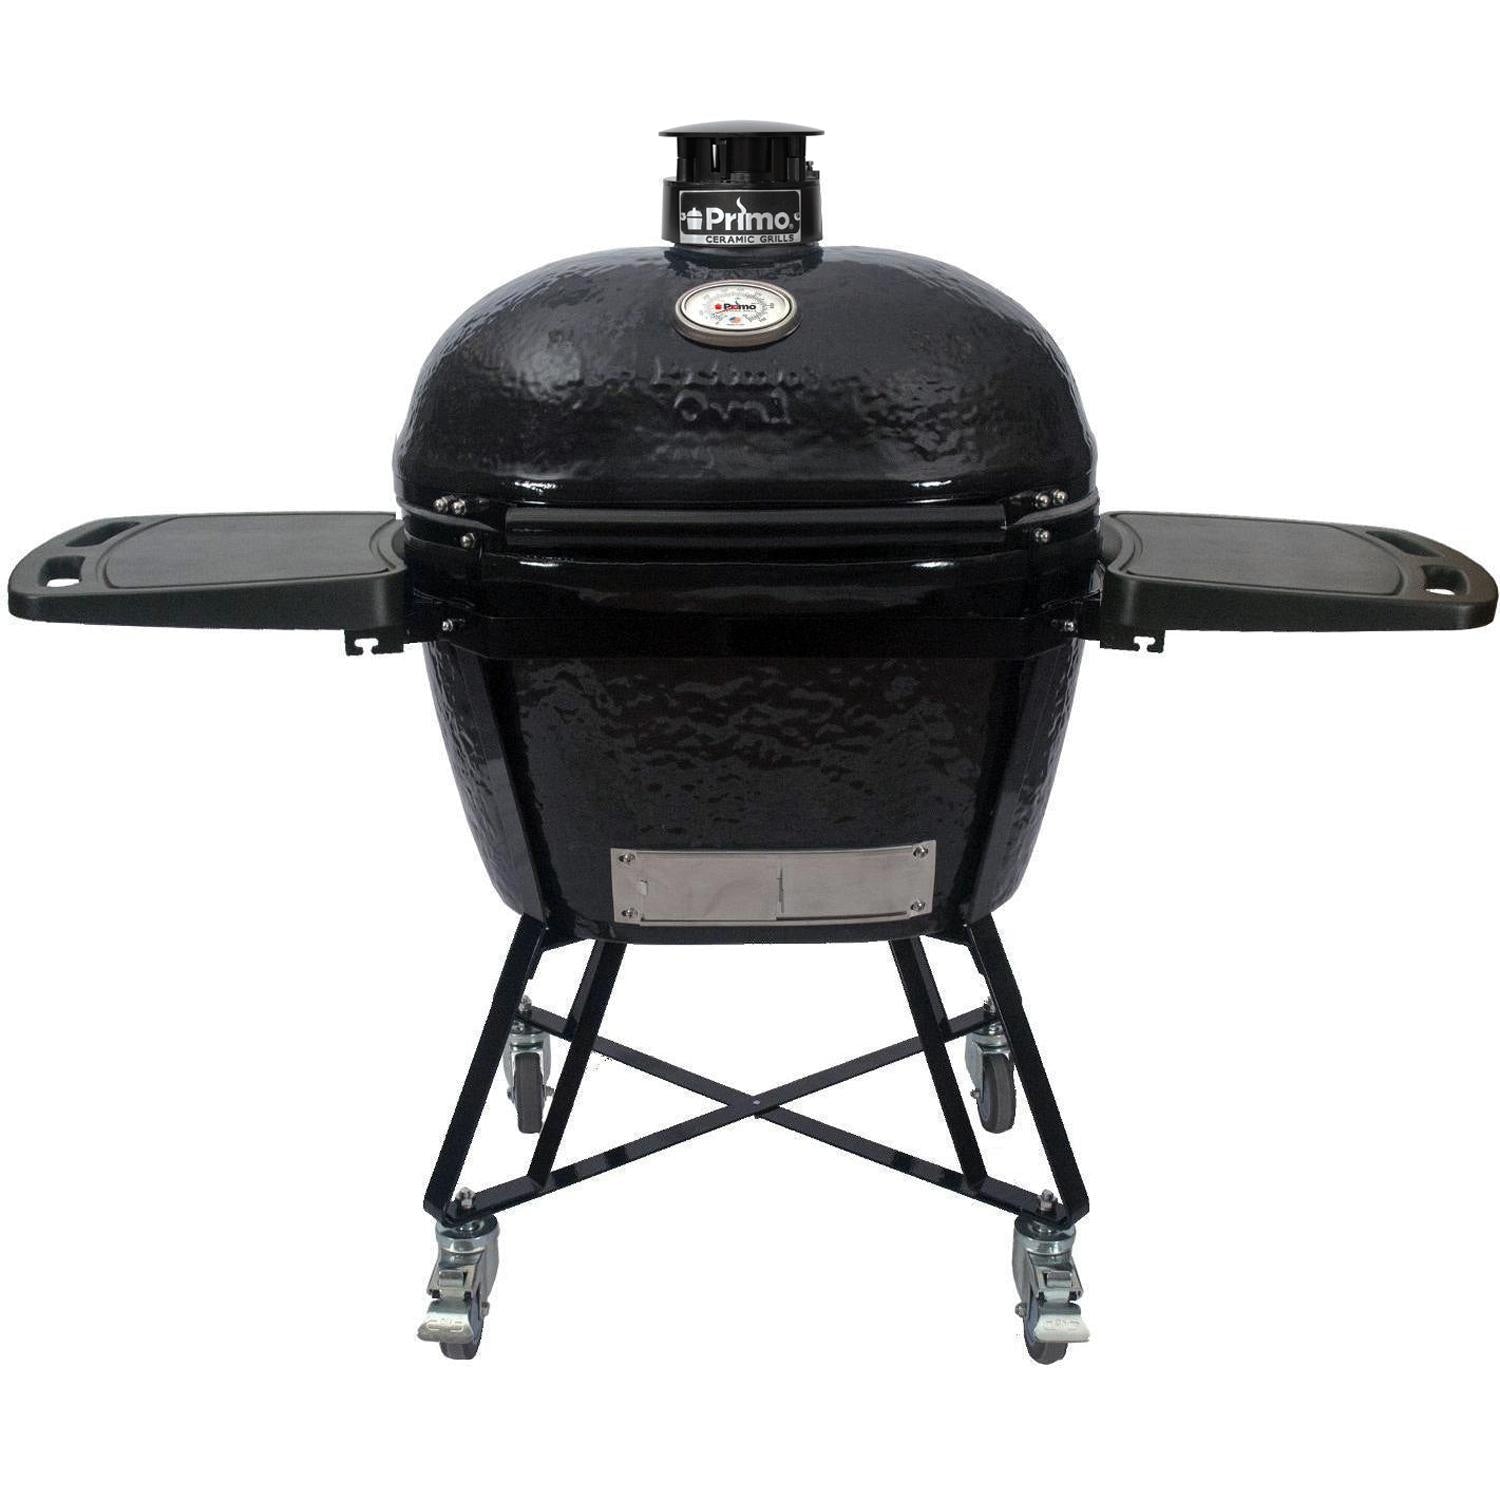 Primo All-In-One Oval LG 300 Charcoal Ceramic Kamado Grill - PGCLGC